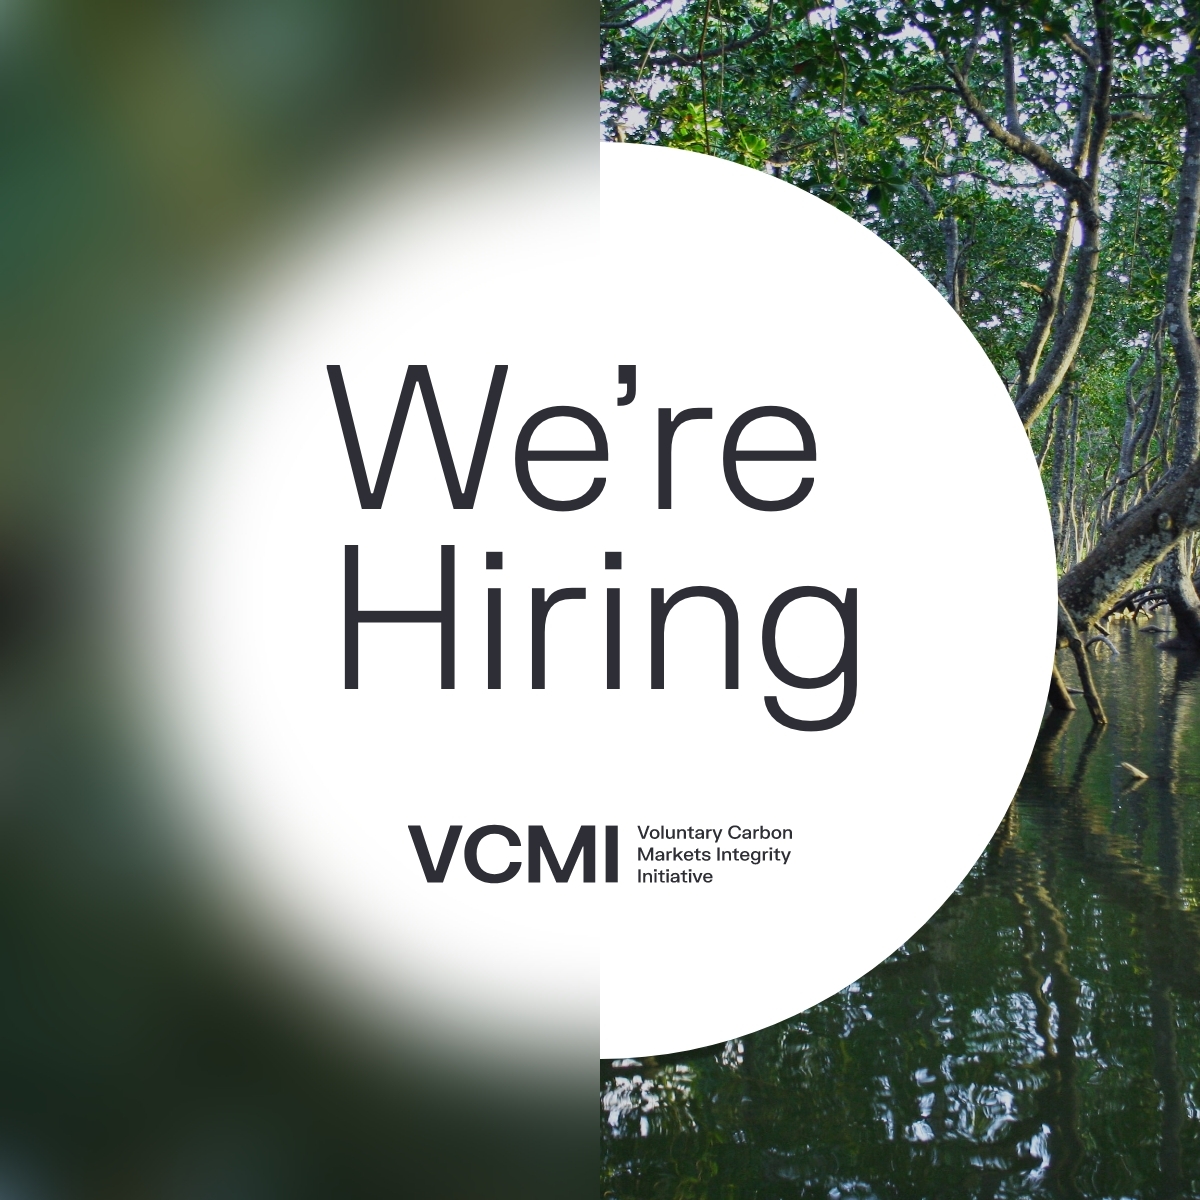 📣 Join our team! VCMI is #hiring a Technical Associate (Finance) – Markets and Standards to help develop key products aimed at advancing #climateaction and finance through a high-integrity voluntary #carbonmarket. Learn more and apply: vcmintegrity.org/working-at-vcm… #recruitment